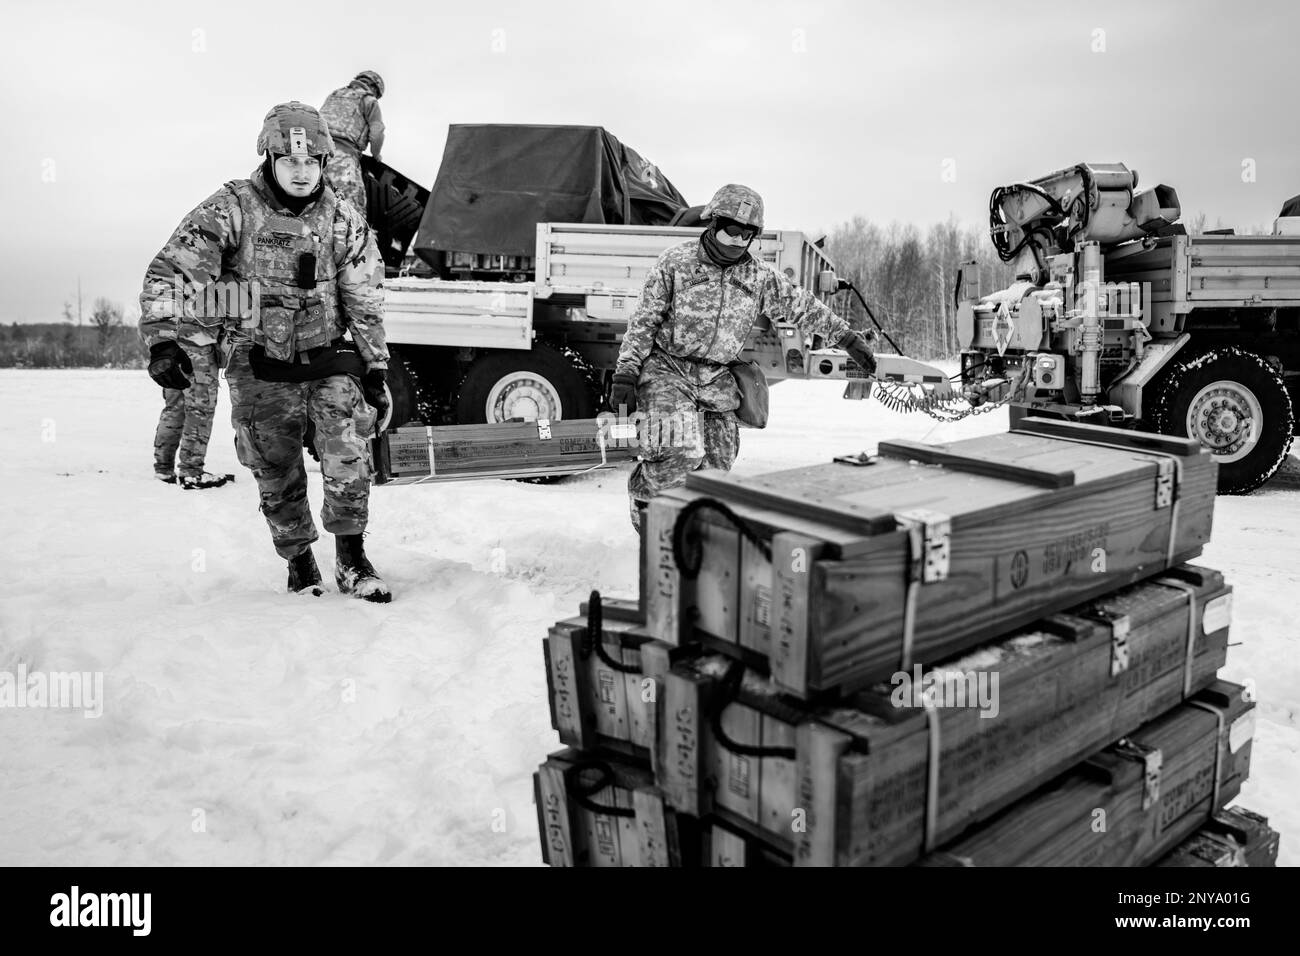 Army Sgt. Meranda Leisgana and Sgt. Trayton Pankratz, 1-120th Field Artillery Regiment, carries a wooden crate of 105mm High Explosive shells for the M119 howitzer during Northern Strike 23-1, Jan. 25, 2023, at Camp Grayling, Mich. Units that participate in Northern Strike’s winter iteration build readiness by conducting joint, cold-weather training designed to meet objectives of the Department of Defense’s Arctic Strategy. Stock Photo